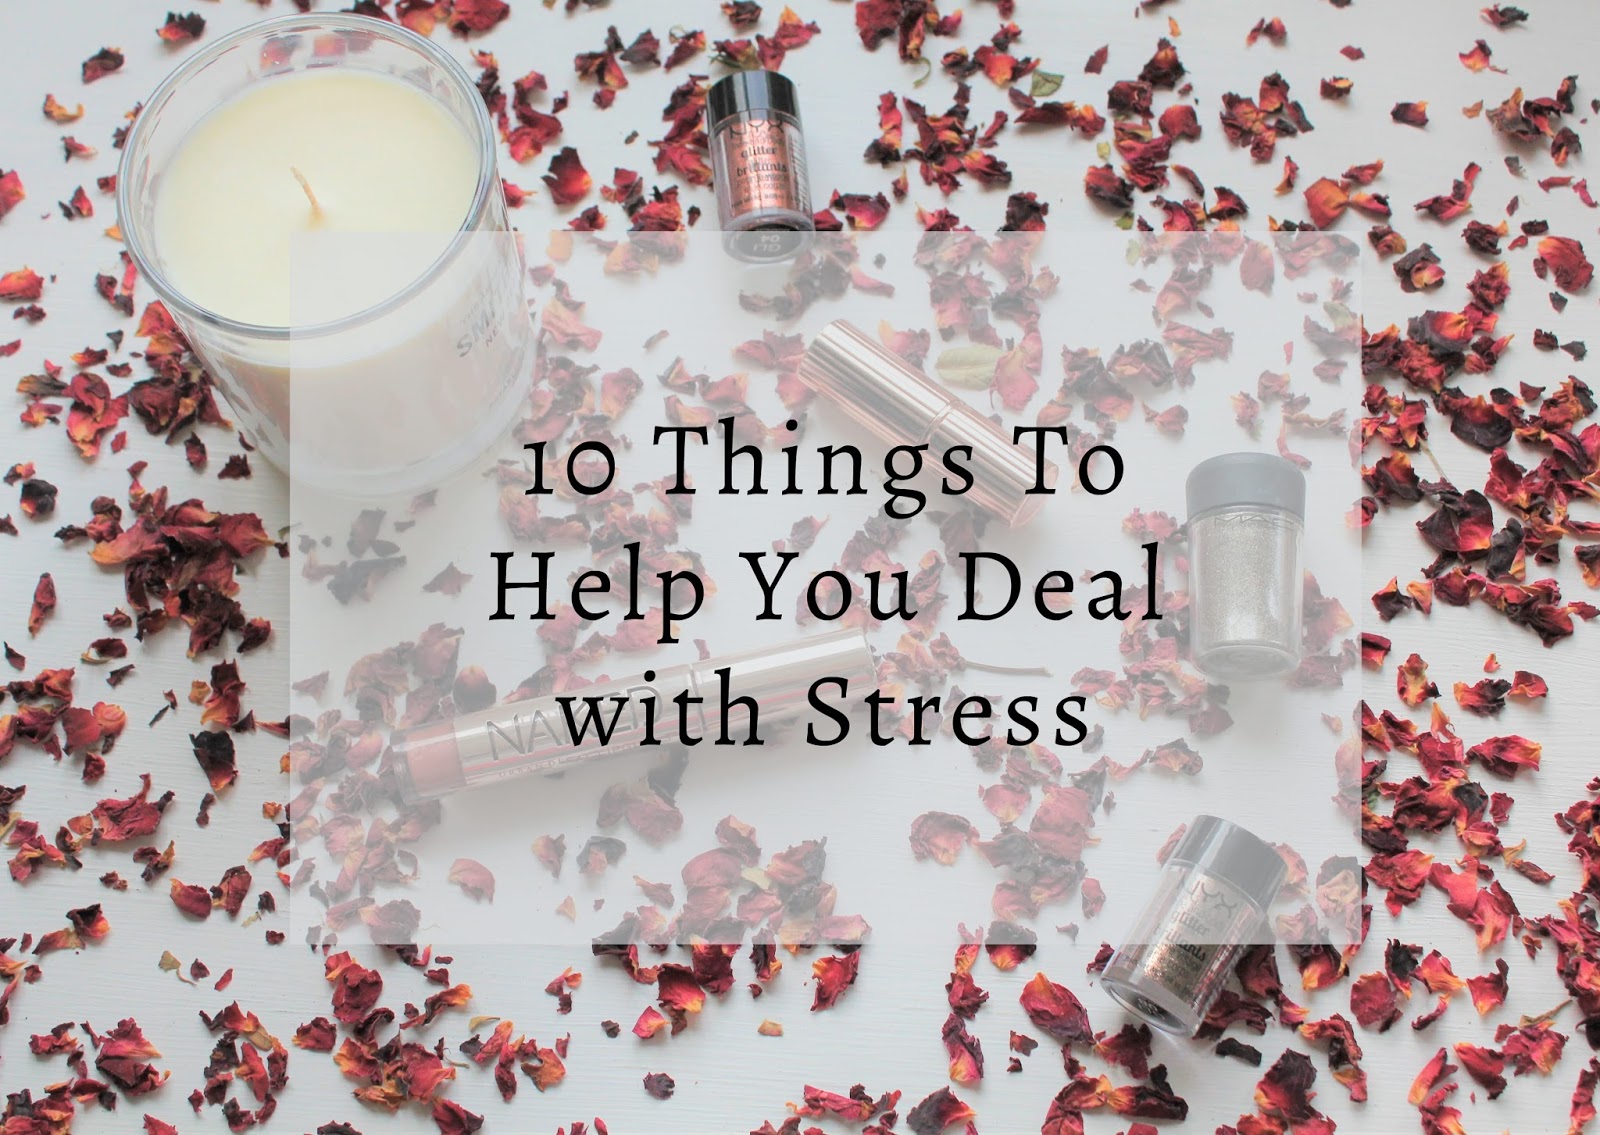 10 Things to Help You Deal with Stress